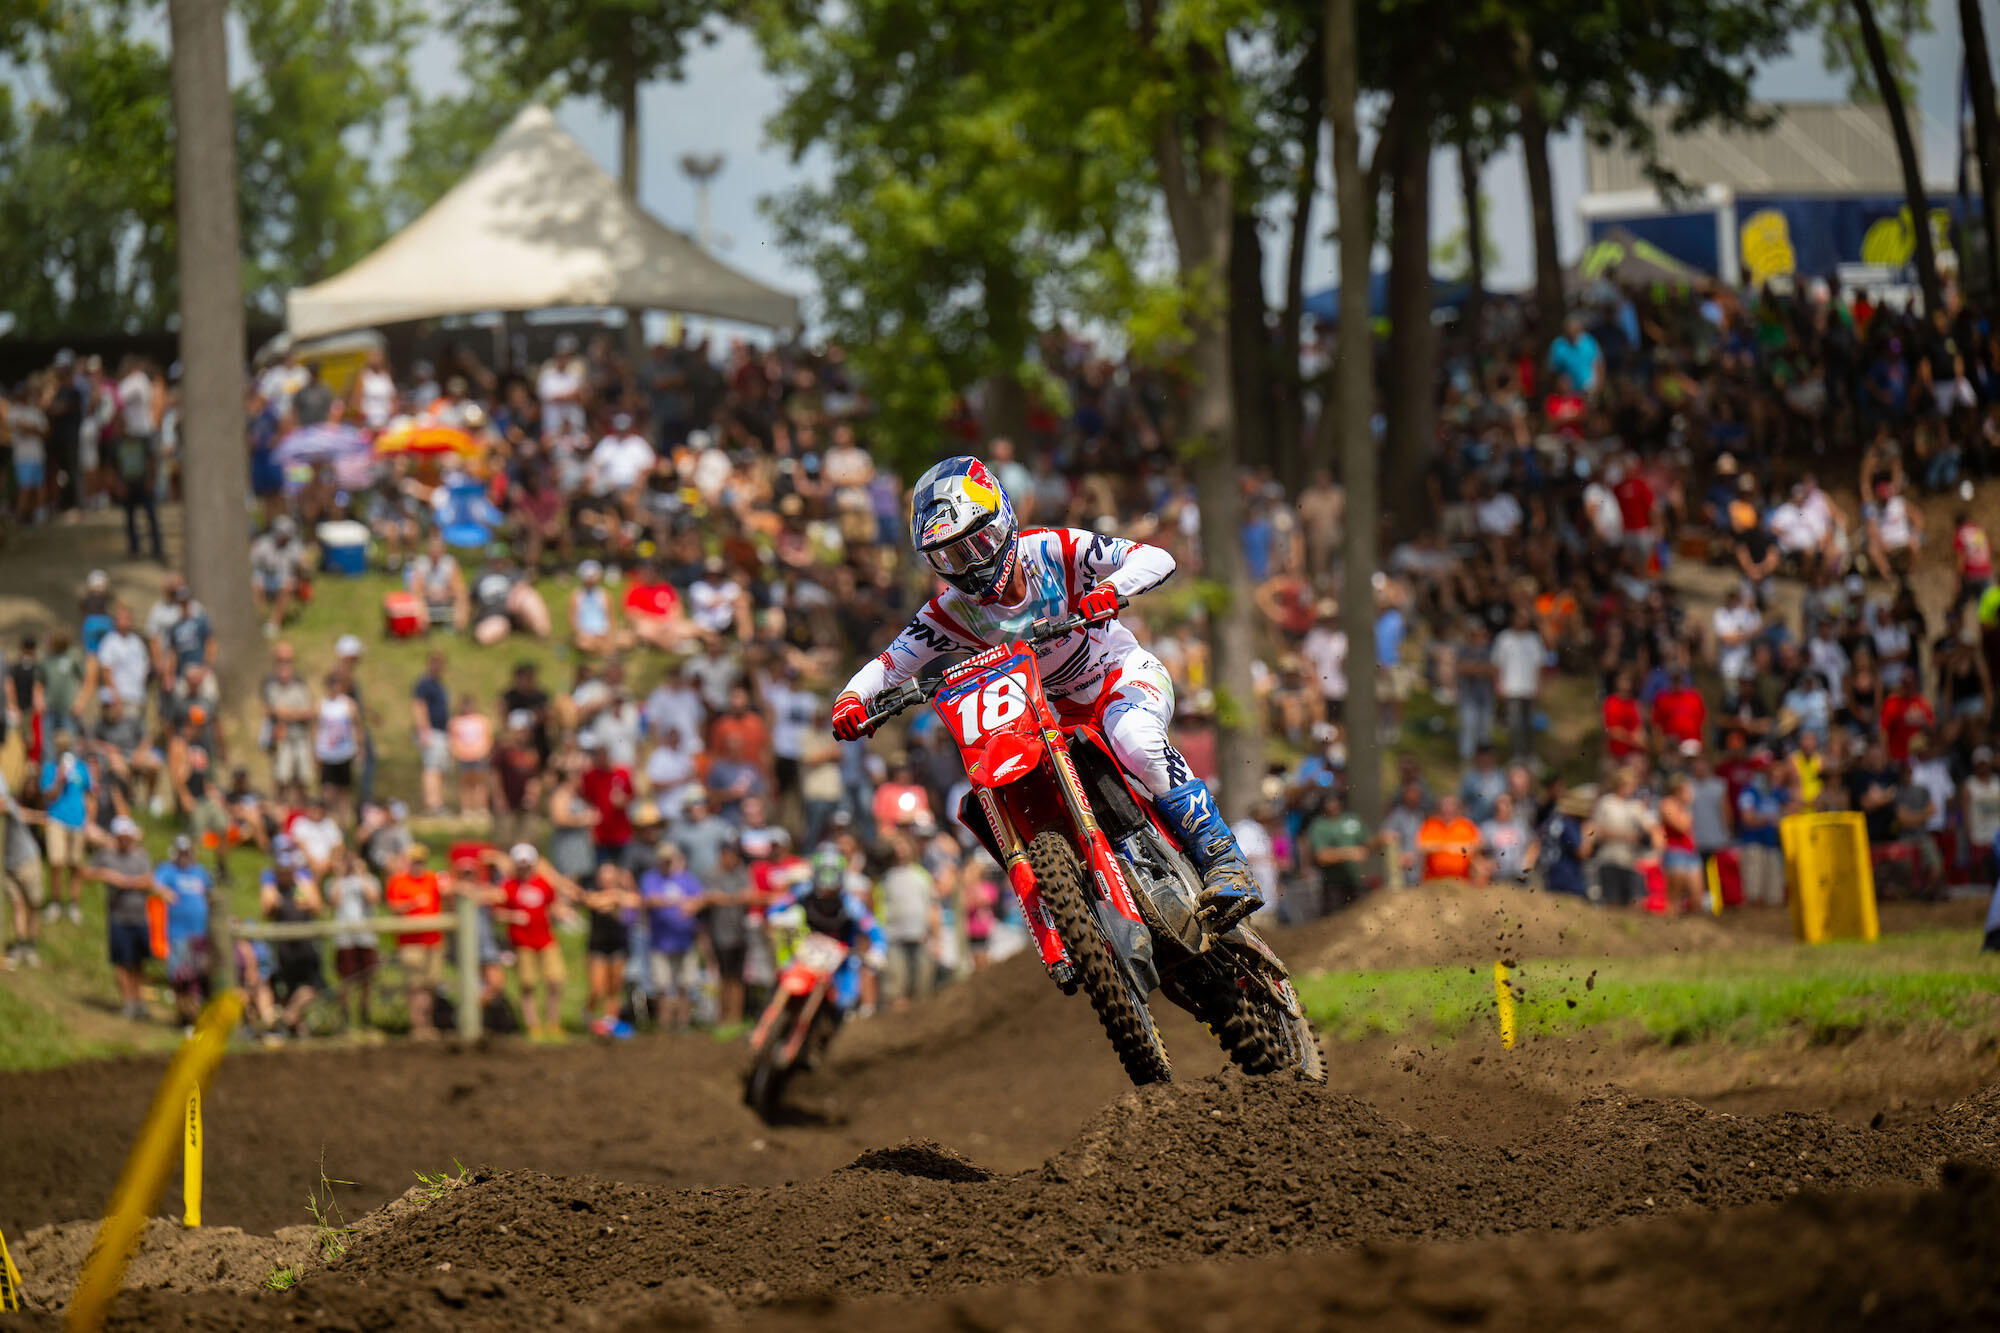 Jett Lawrence looks to sustain meteoric rise during Pro Motocross